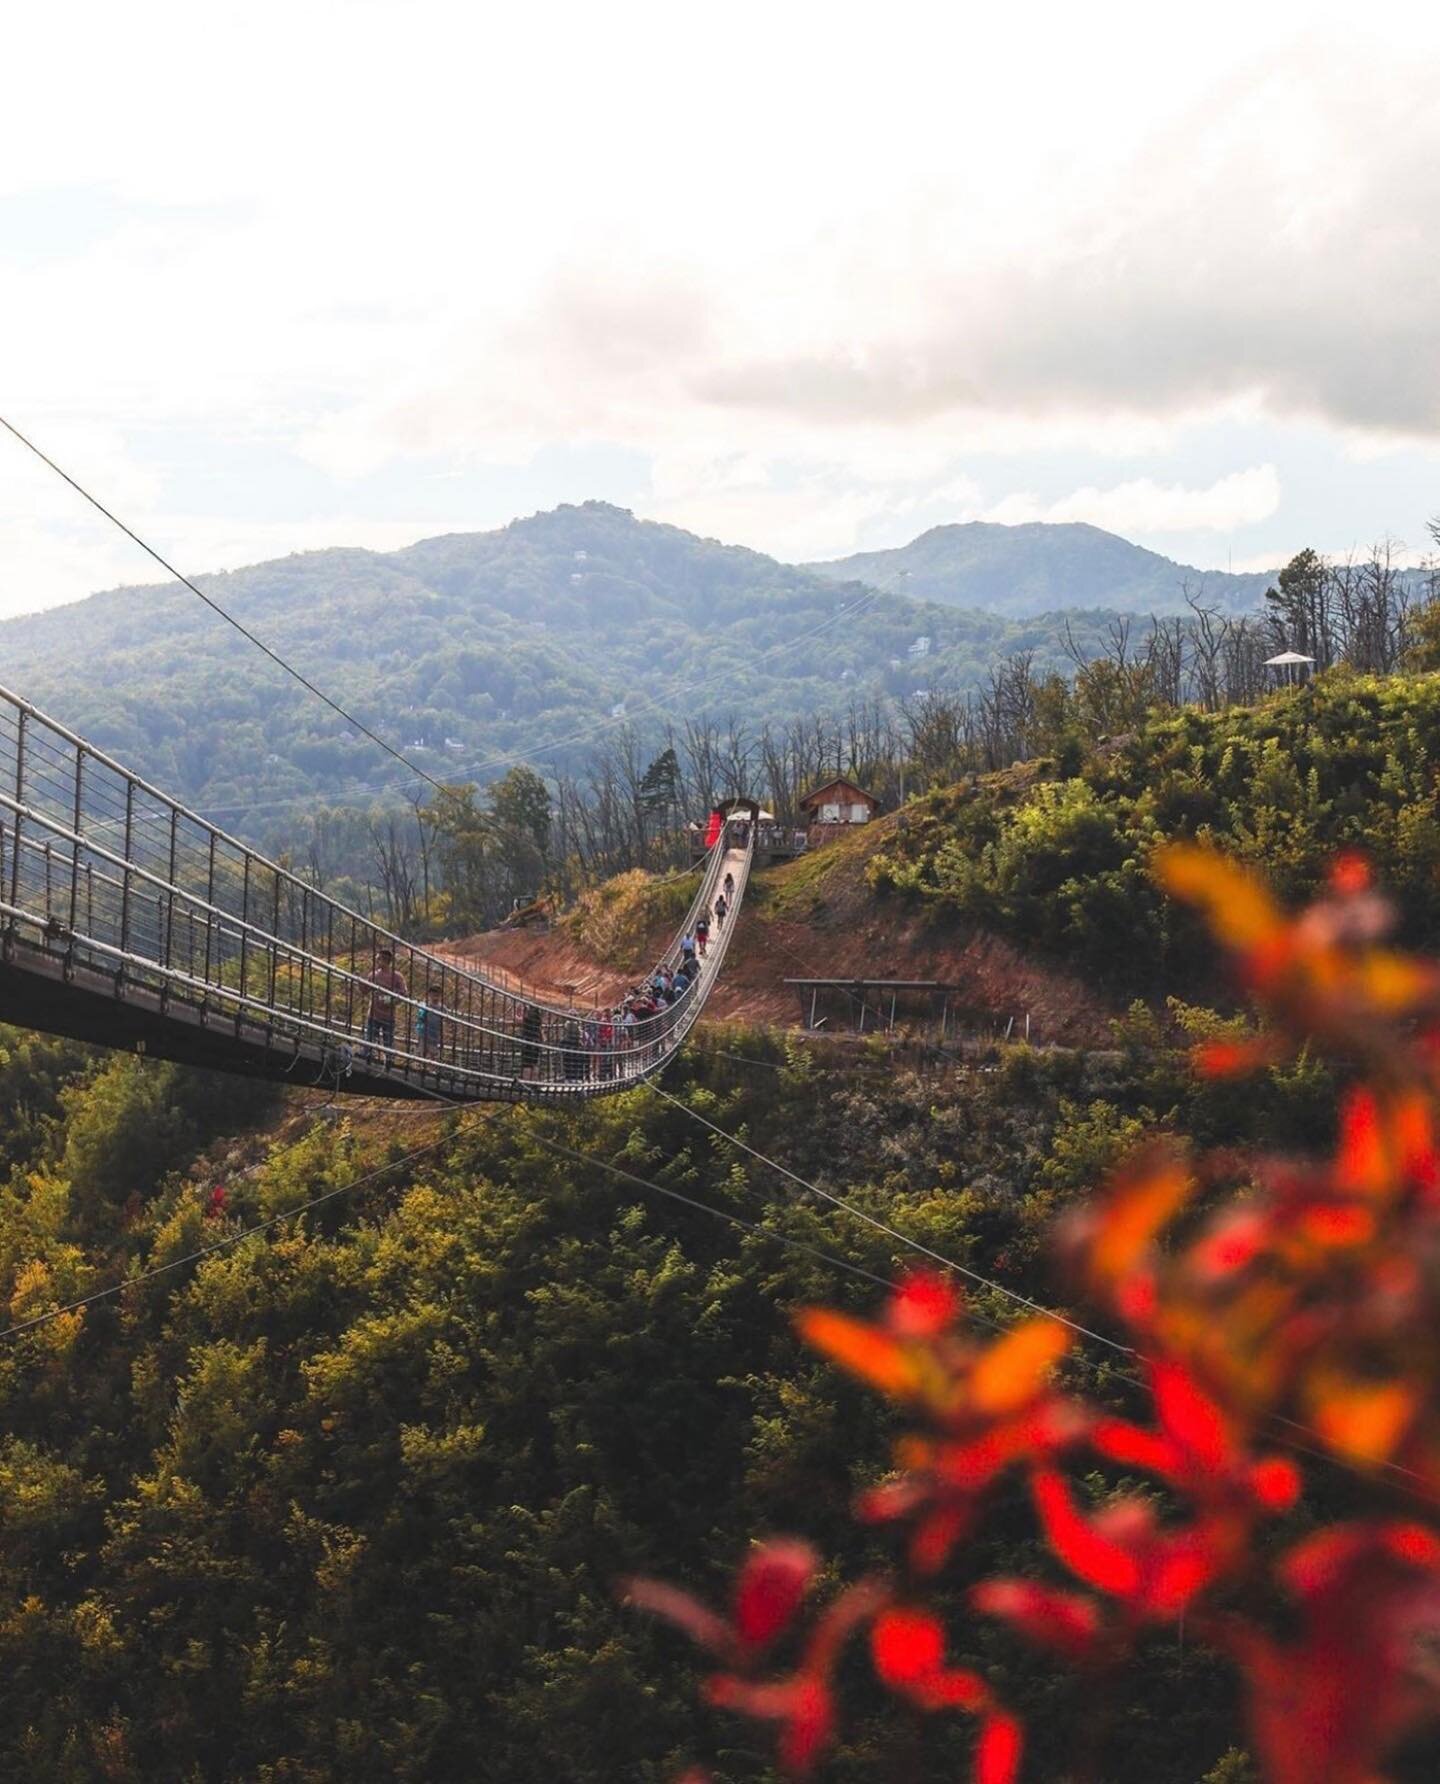 Only 23 more days until fall, but who&rsquo;s counting? 👀

What&rsquo;s your favorite thing to do in Gatlinburg during the fall? Drop a comment. 

Image via @gatlinburgskylift